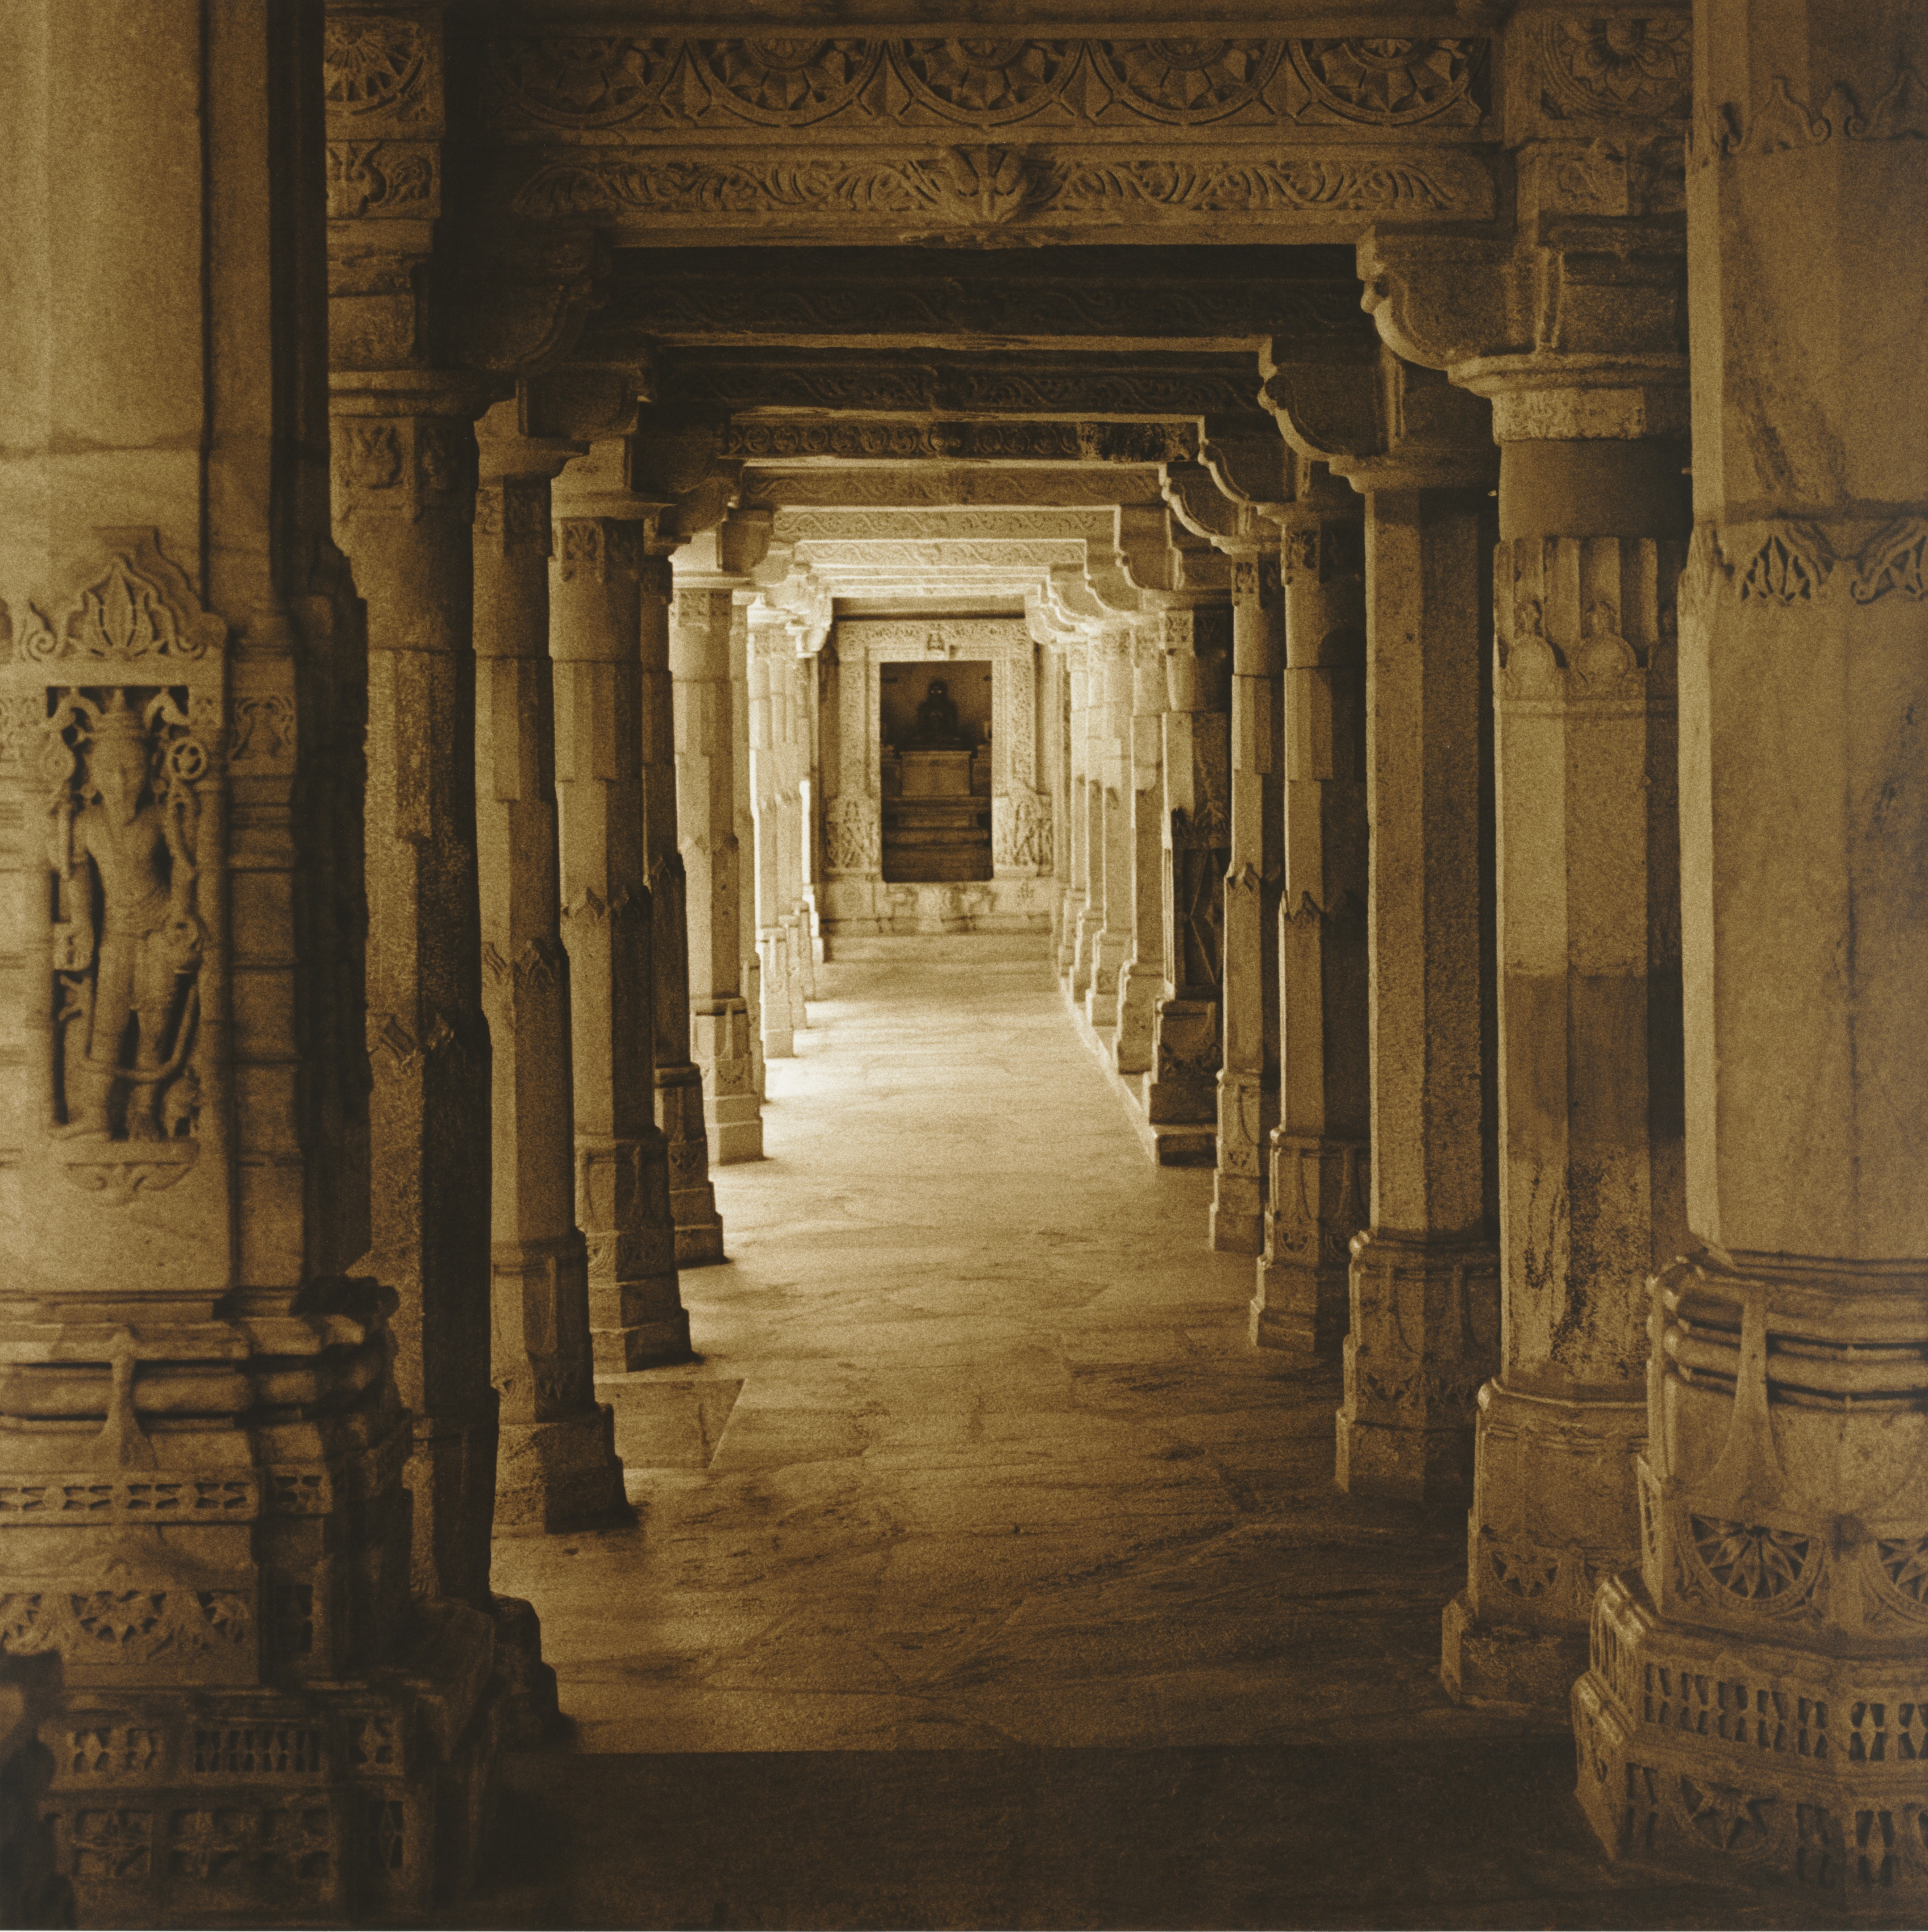 Corridor with Jina from the Marble Jain Temple at Ranakpur, Rajasthan